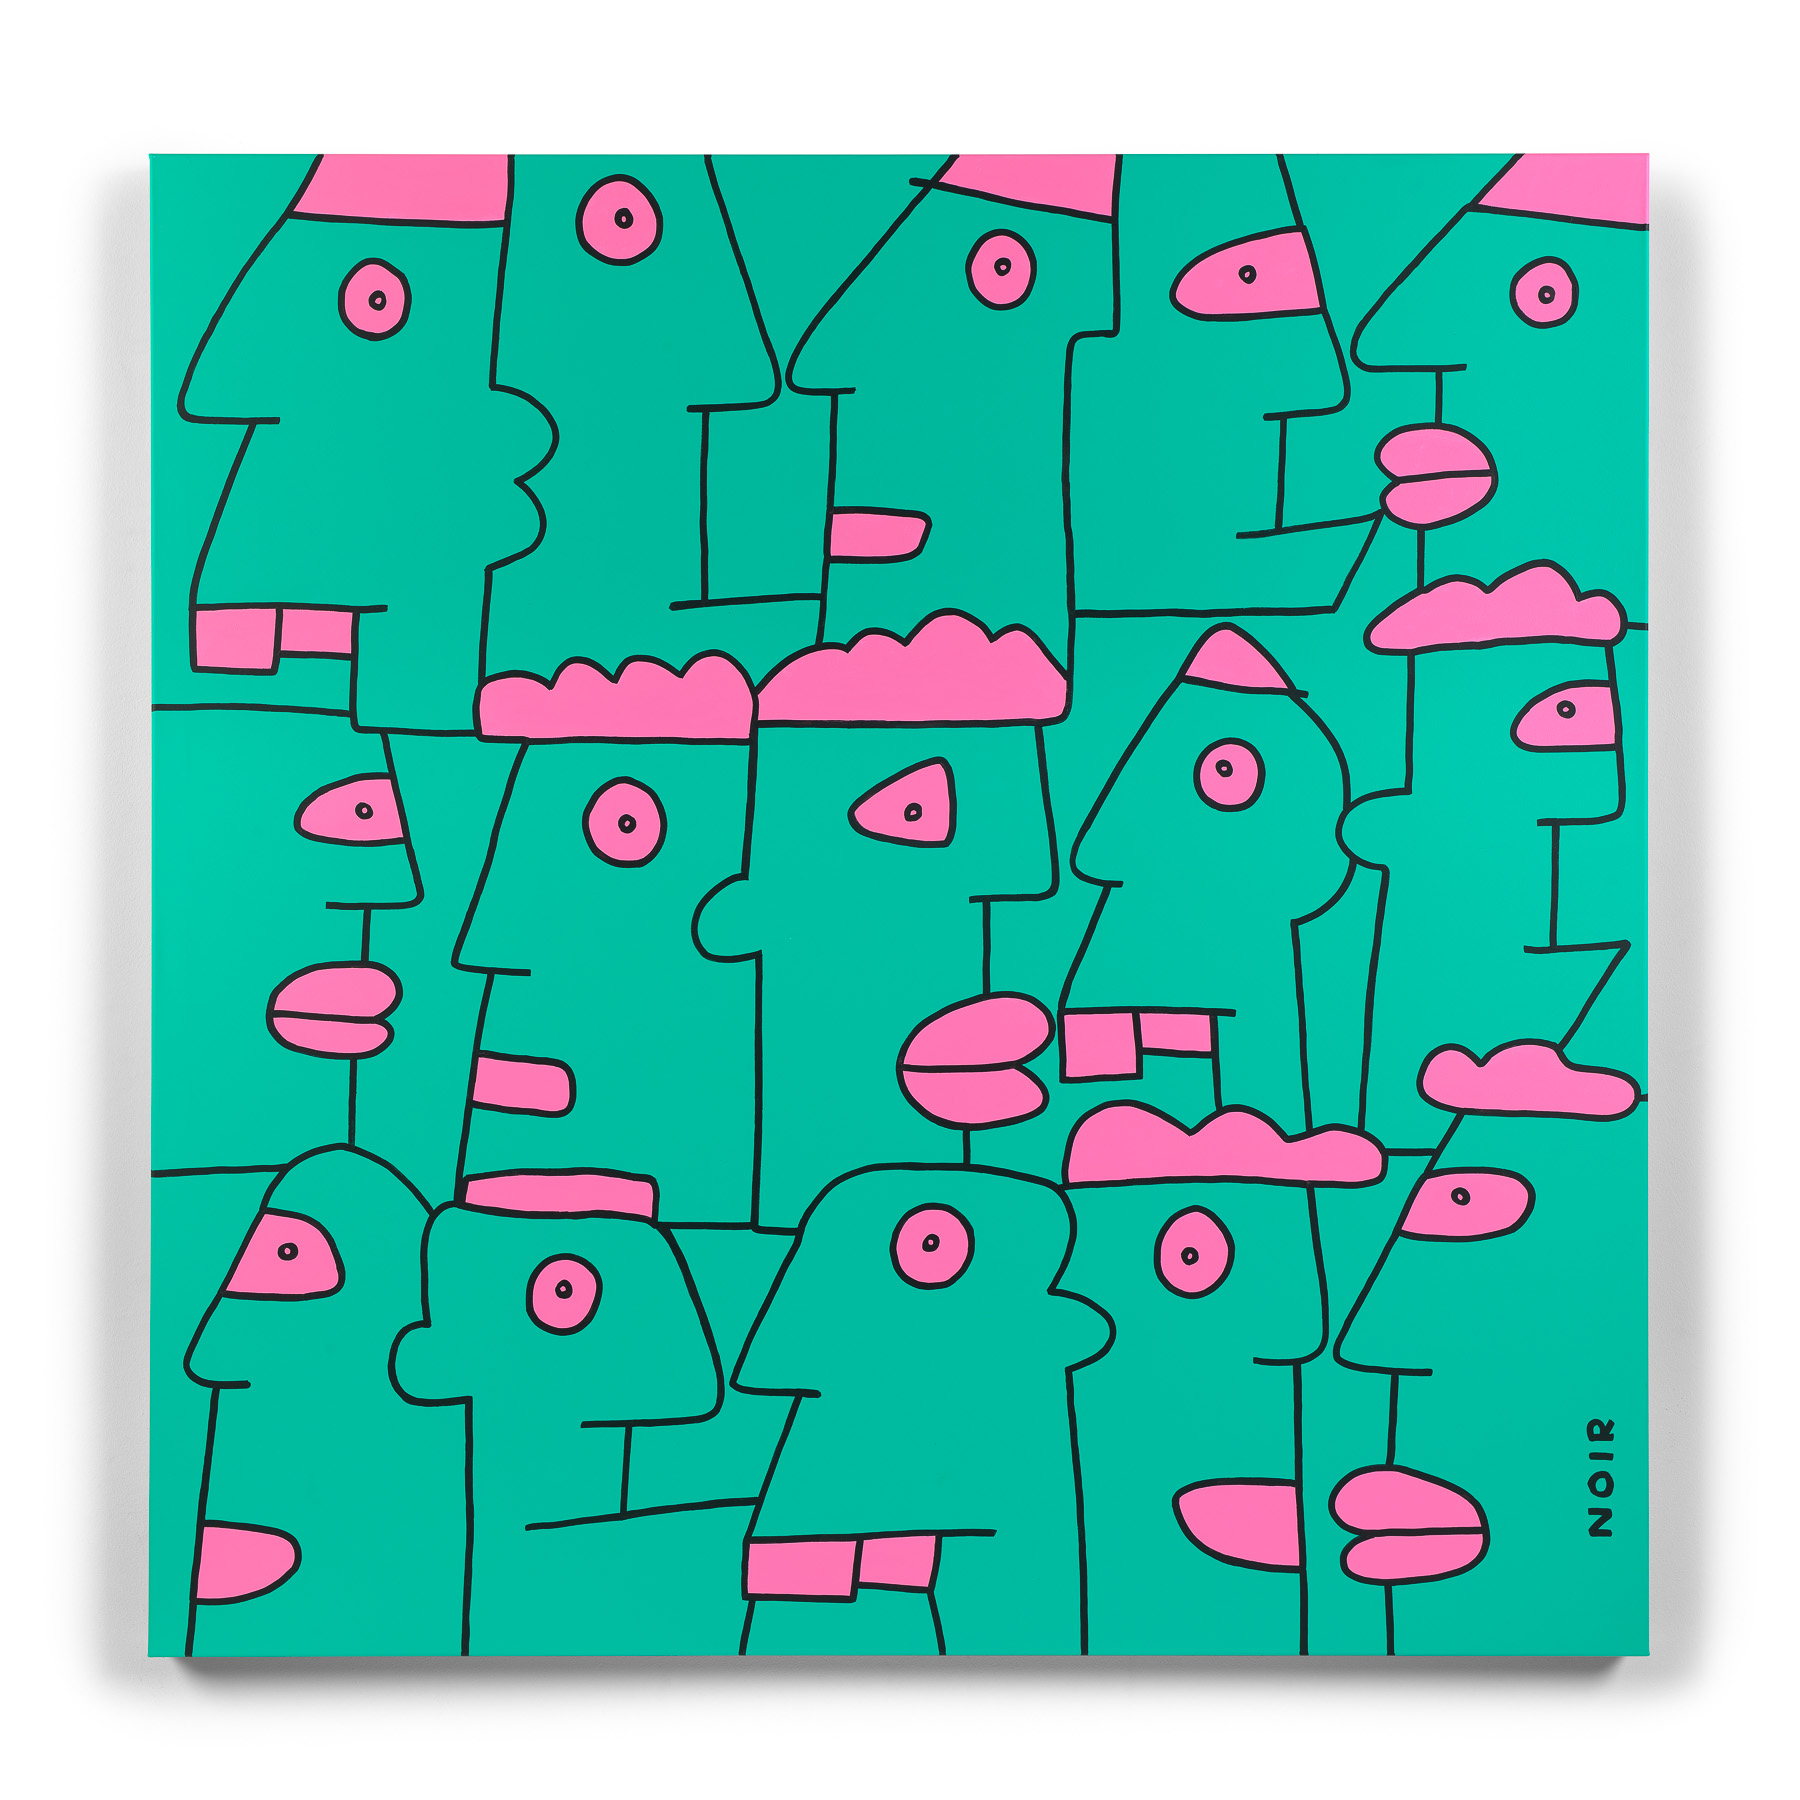 Thierry Noir - Manifest for arriving always on time (180cm by 180cm, 2023)